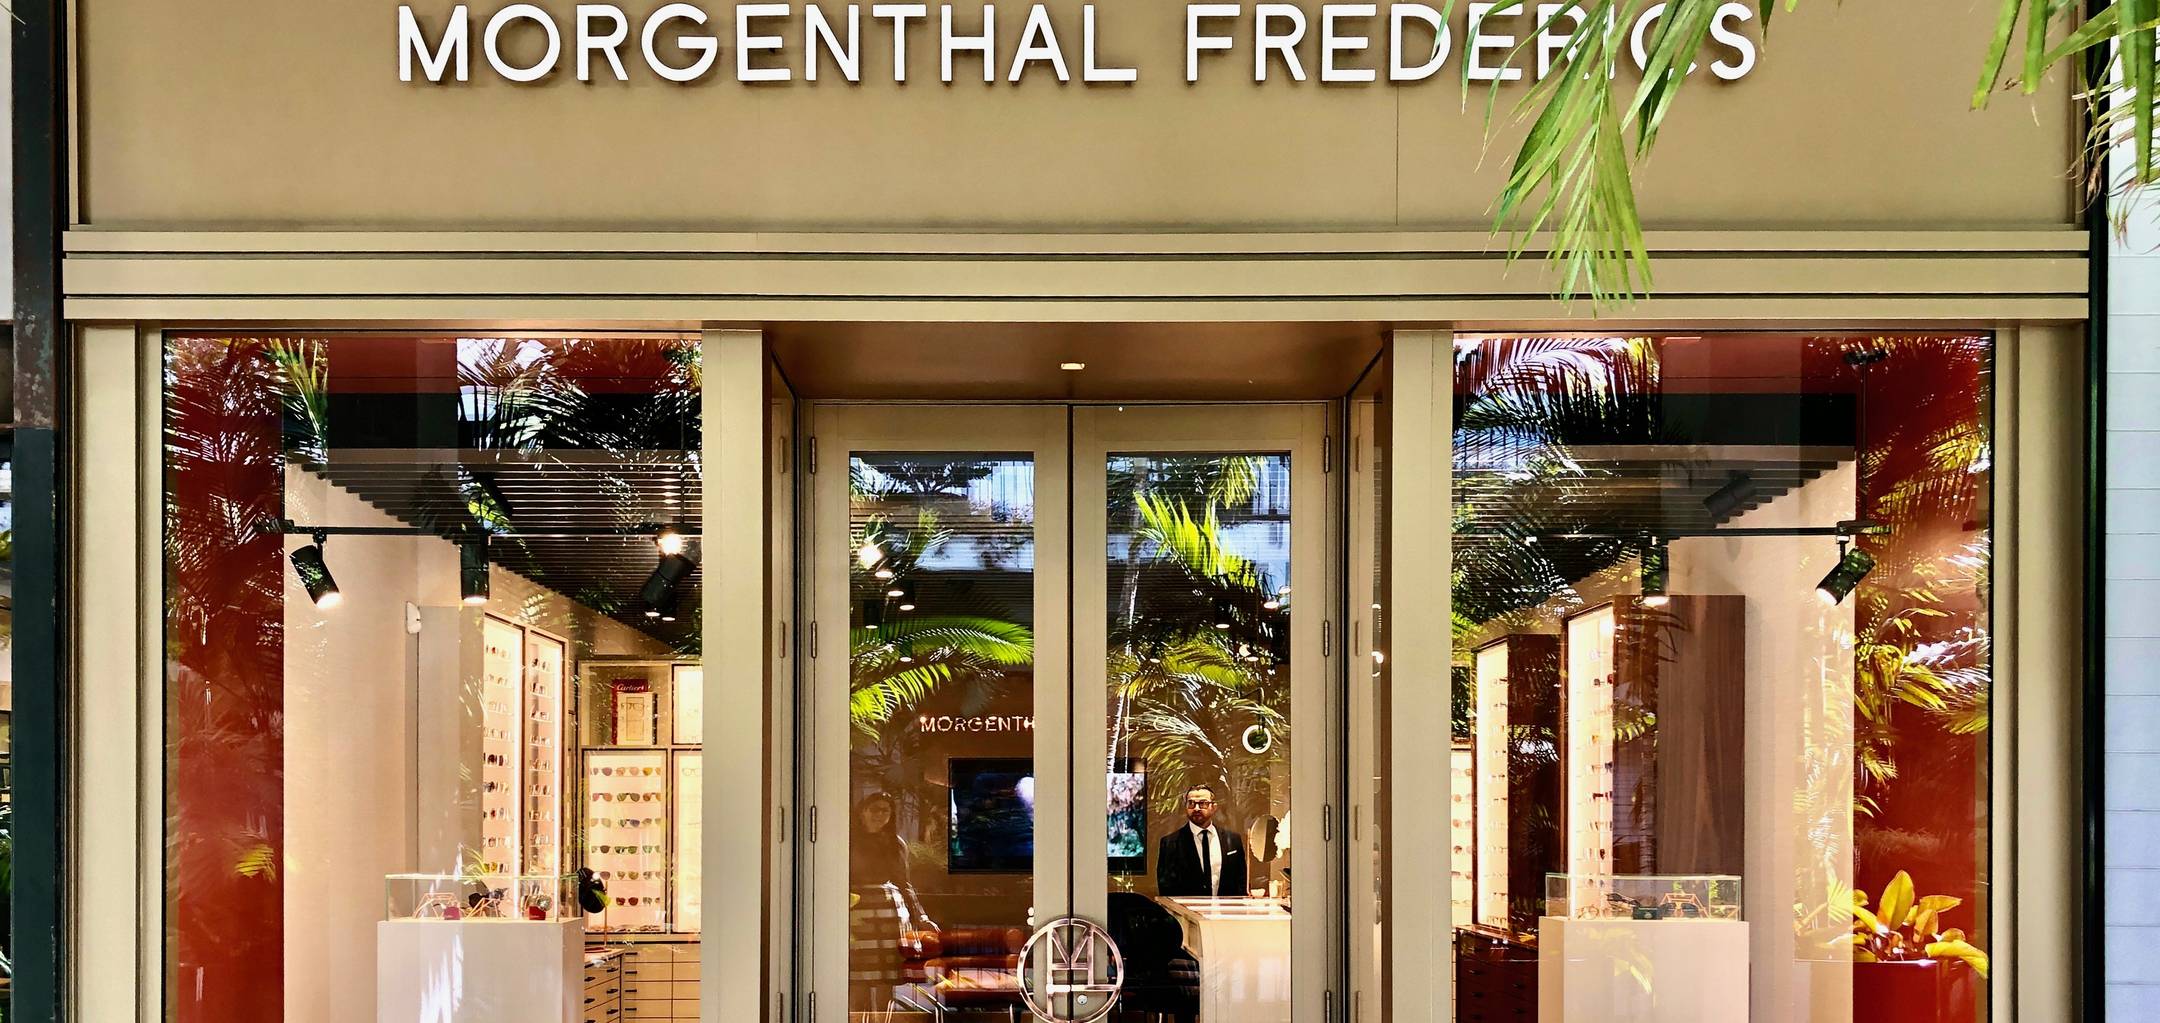 Morgenthal Frederics store front